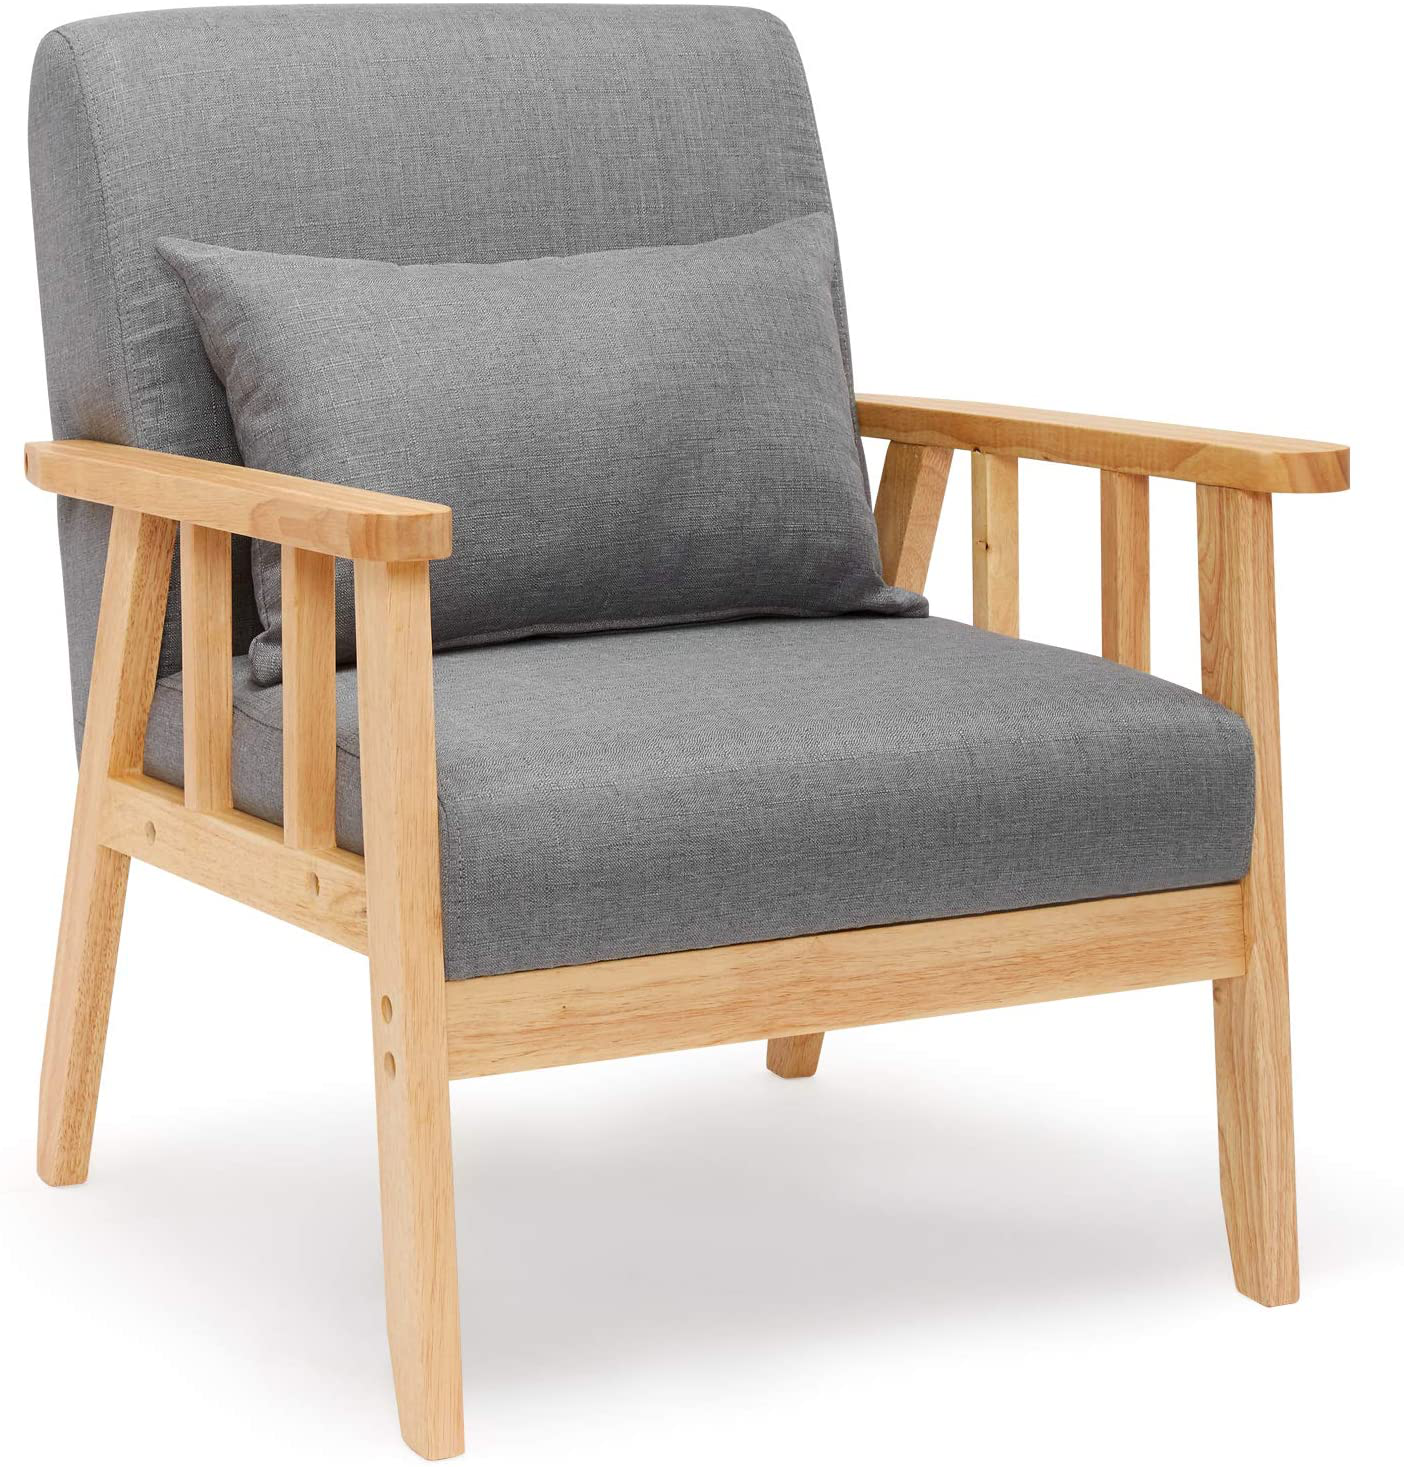 Toby Armchair Sofa Solid Wood Frame with Cushion 